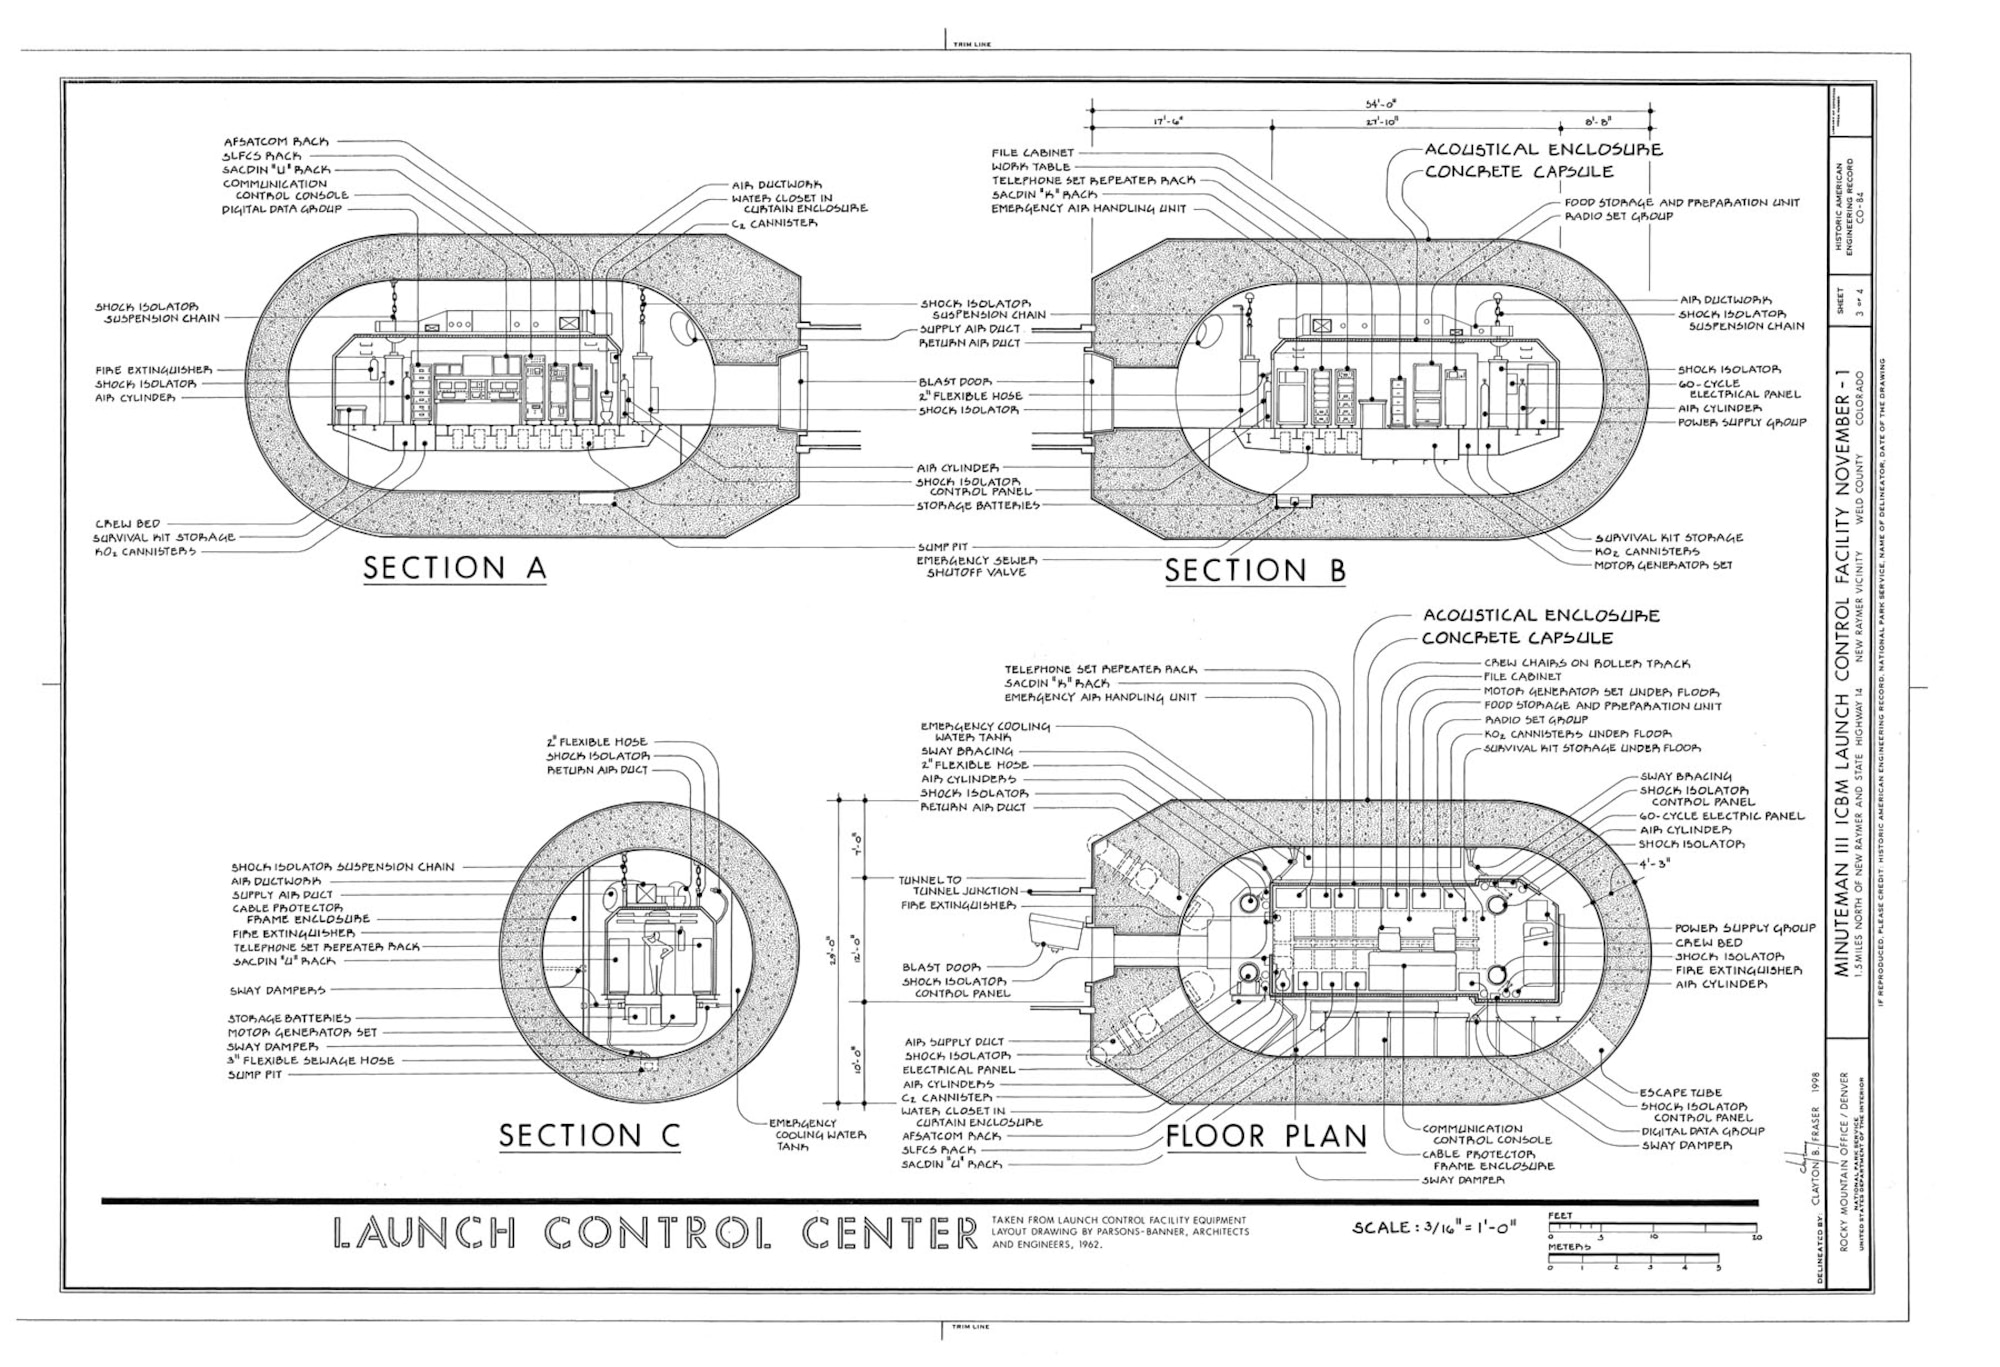 Combat crews work in the Launch Control Center (LCC). The underground “capsule” of thick concrete and steel holds a module much like the trainer you are in now (this drawing shows a Minuteman III LCC). The module is suspended on giant shock isolators to protect the crew and sensitive electronics from nuclear attack. (Historic American Engineering Record, National Park Service, Clayton B. Fraser, 1998.)